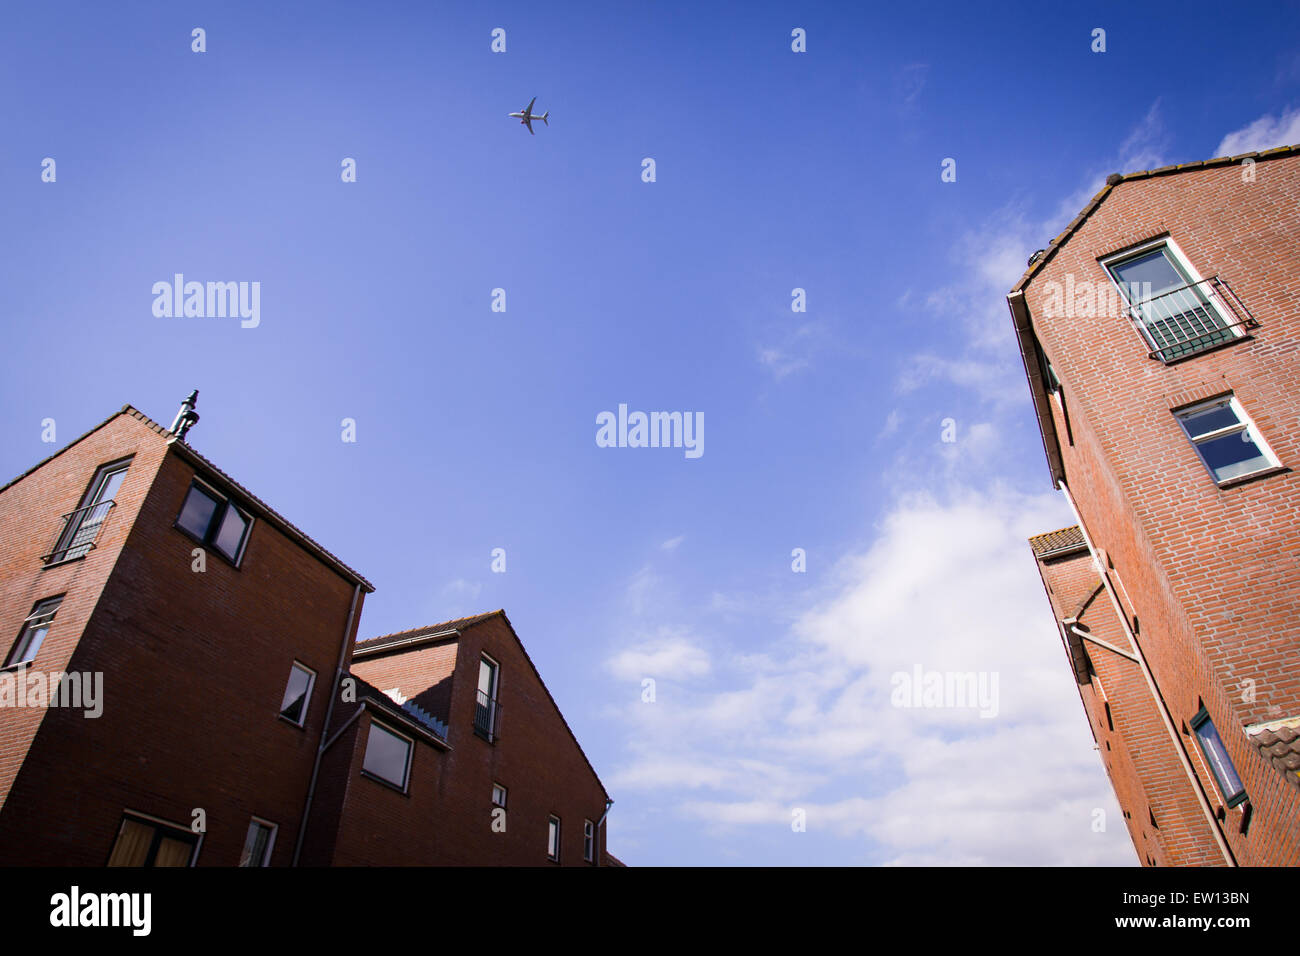 A commercial airplane is seen flying over a Dutch suburb. Stock Photo